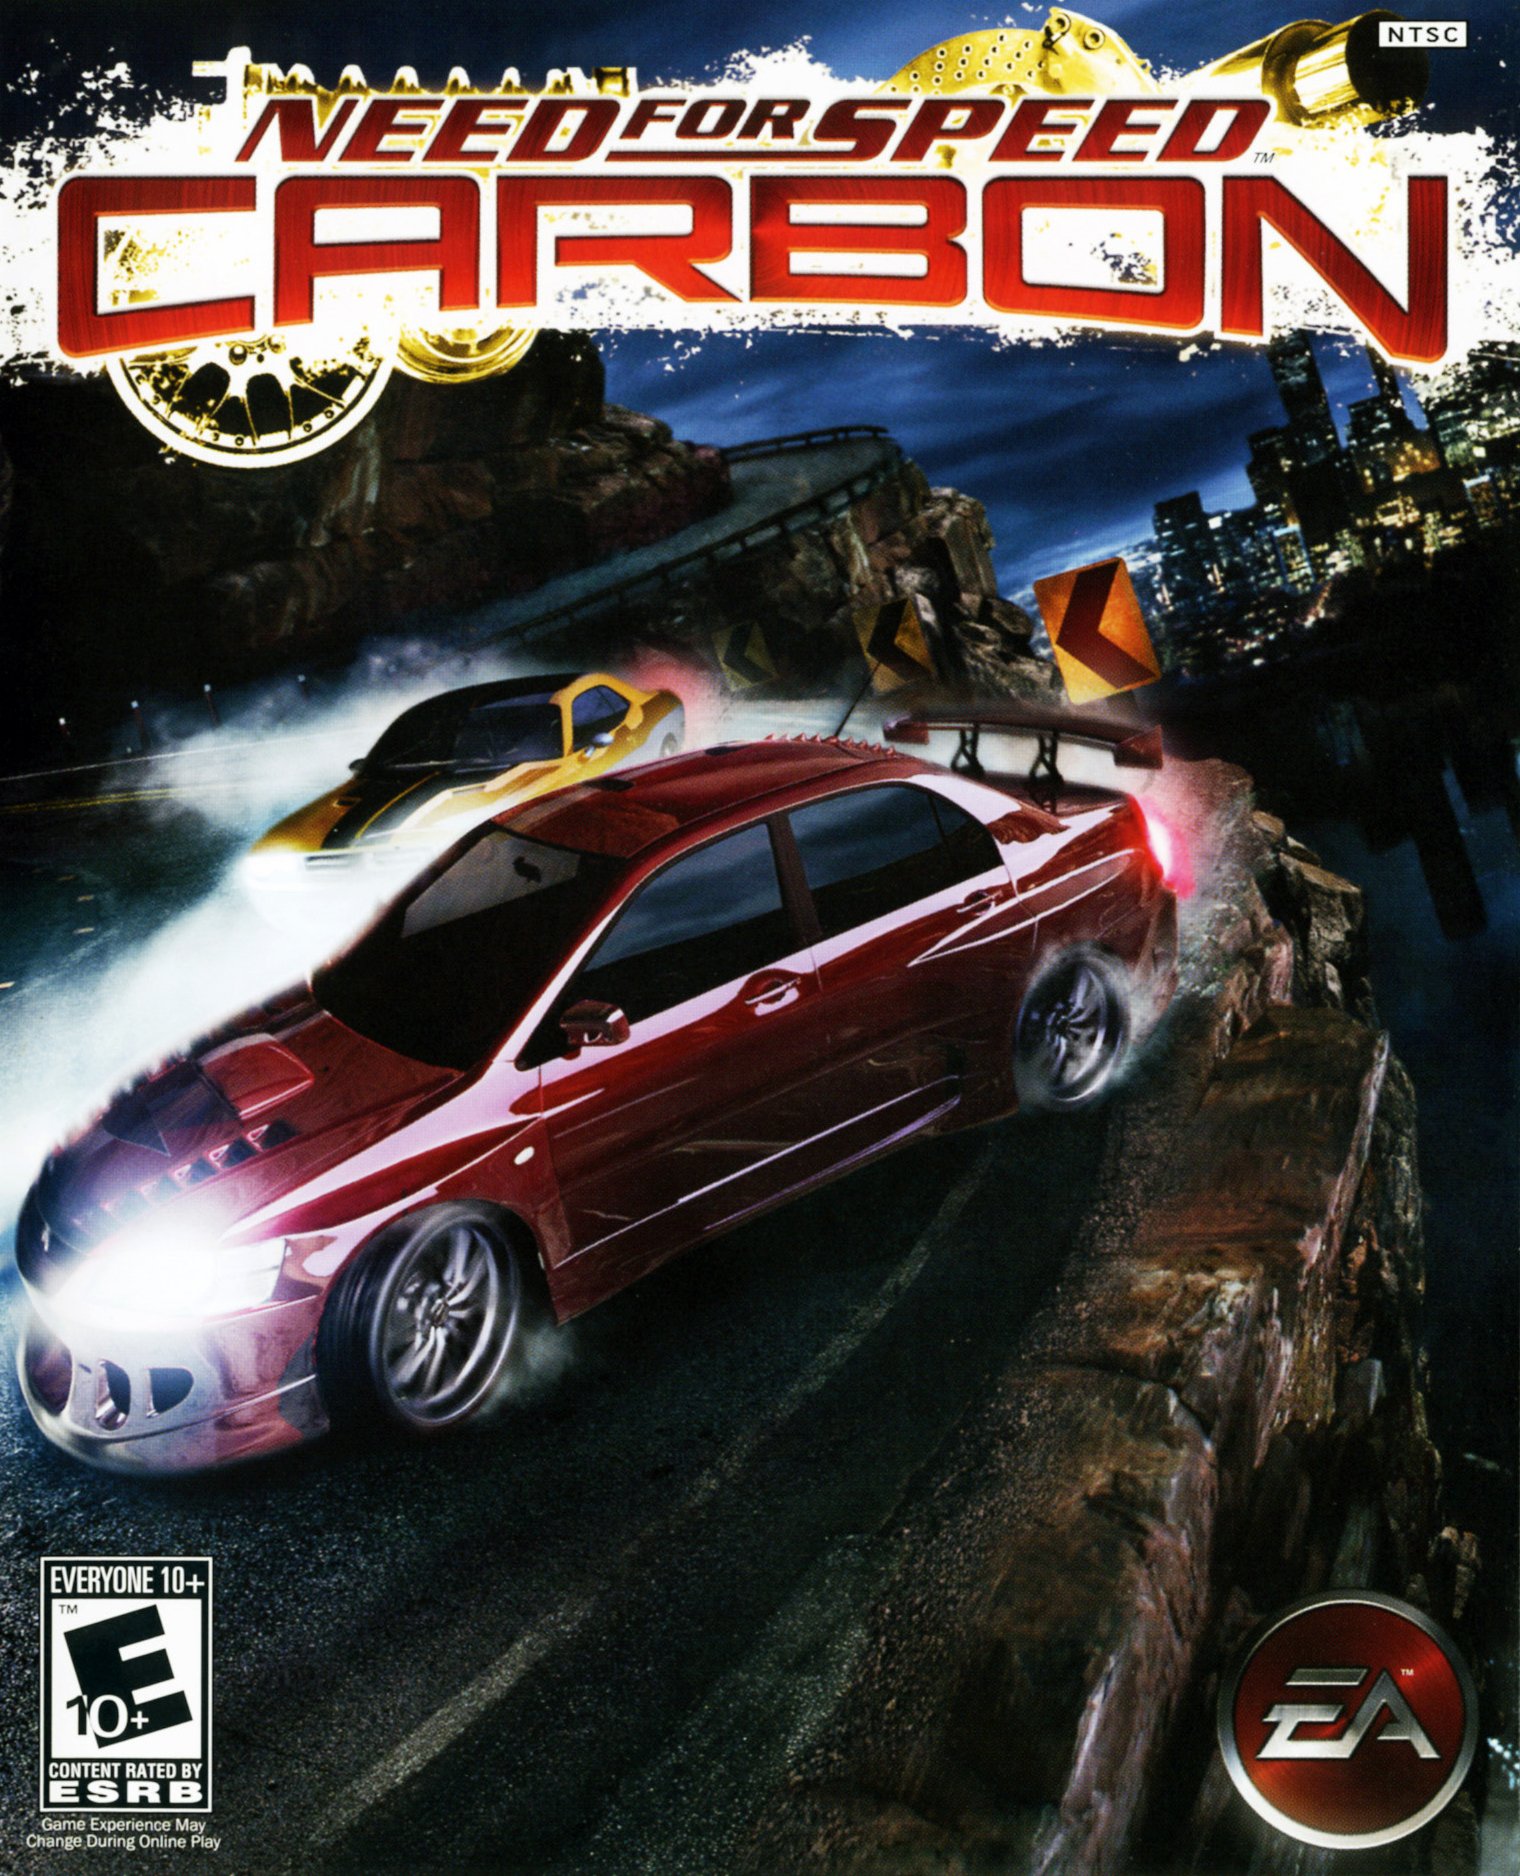 Image of Need for Speed: Carbon